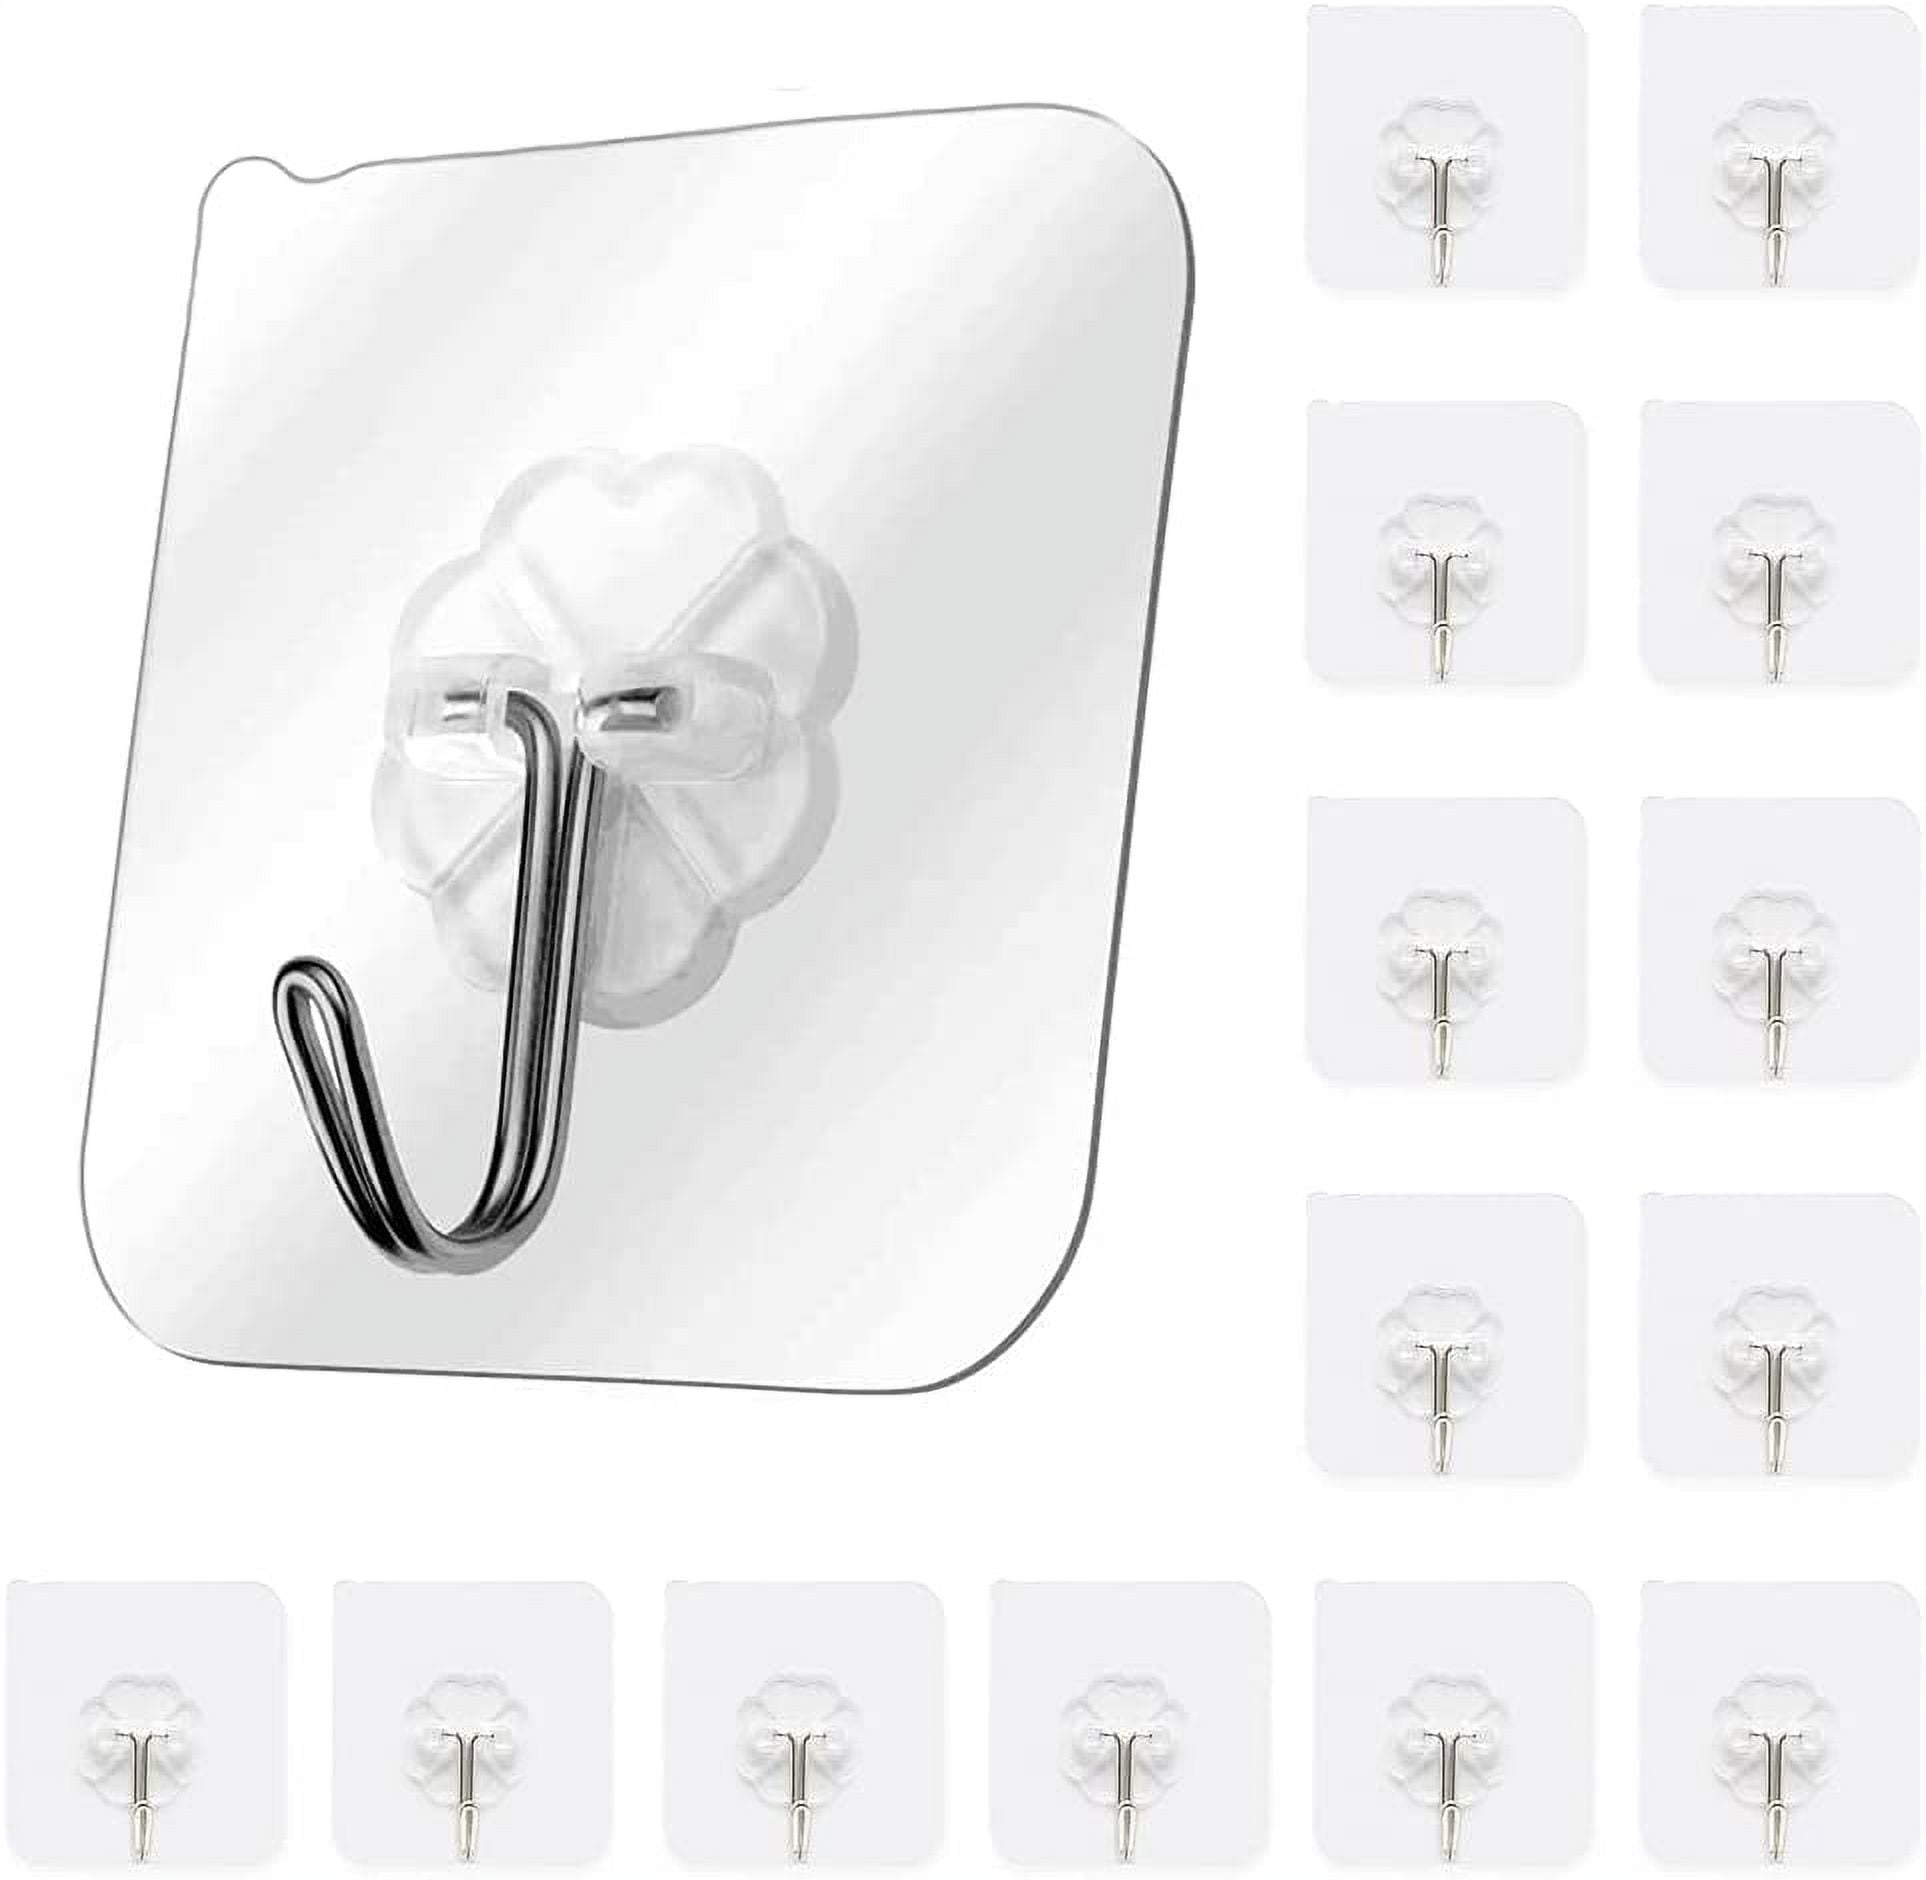 GSR Clear Double-Sided Adhesive Wall Hooks - 10-Piece Mounted Door Hanger Kit - No Drill Sticker Hangers with Suction Cup for Bathroom, Kitchen